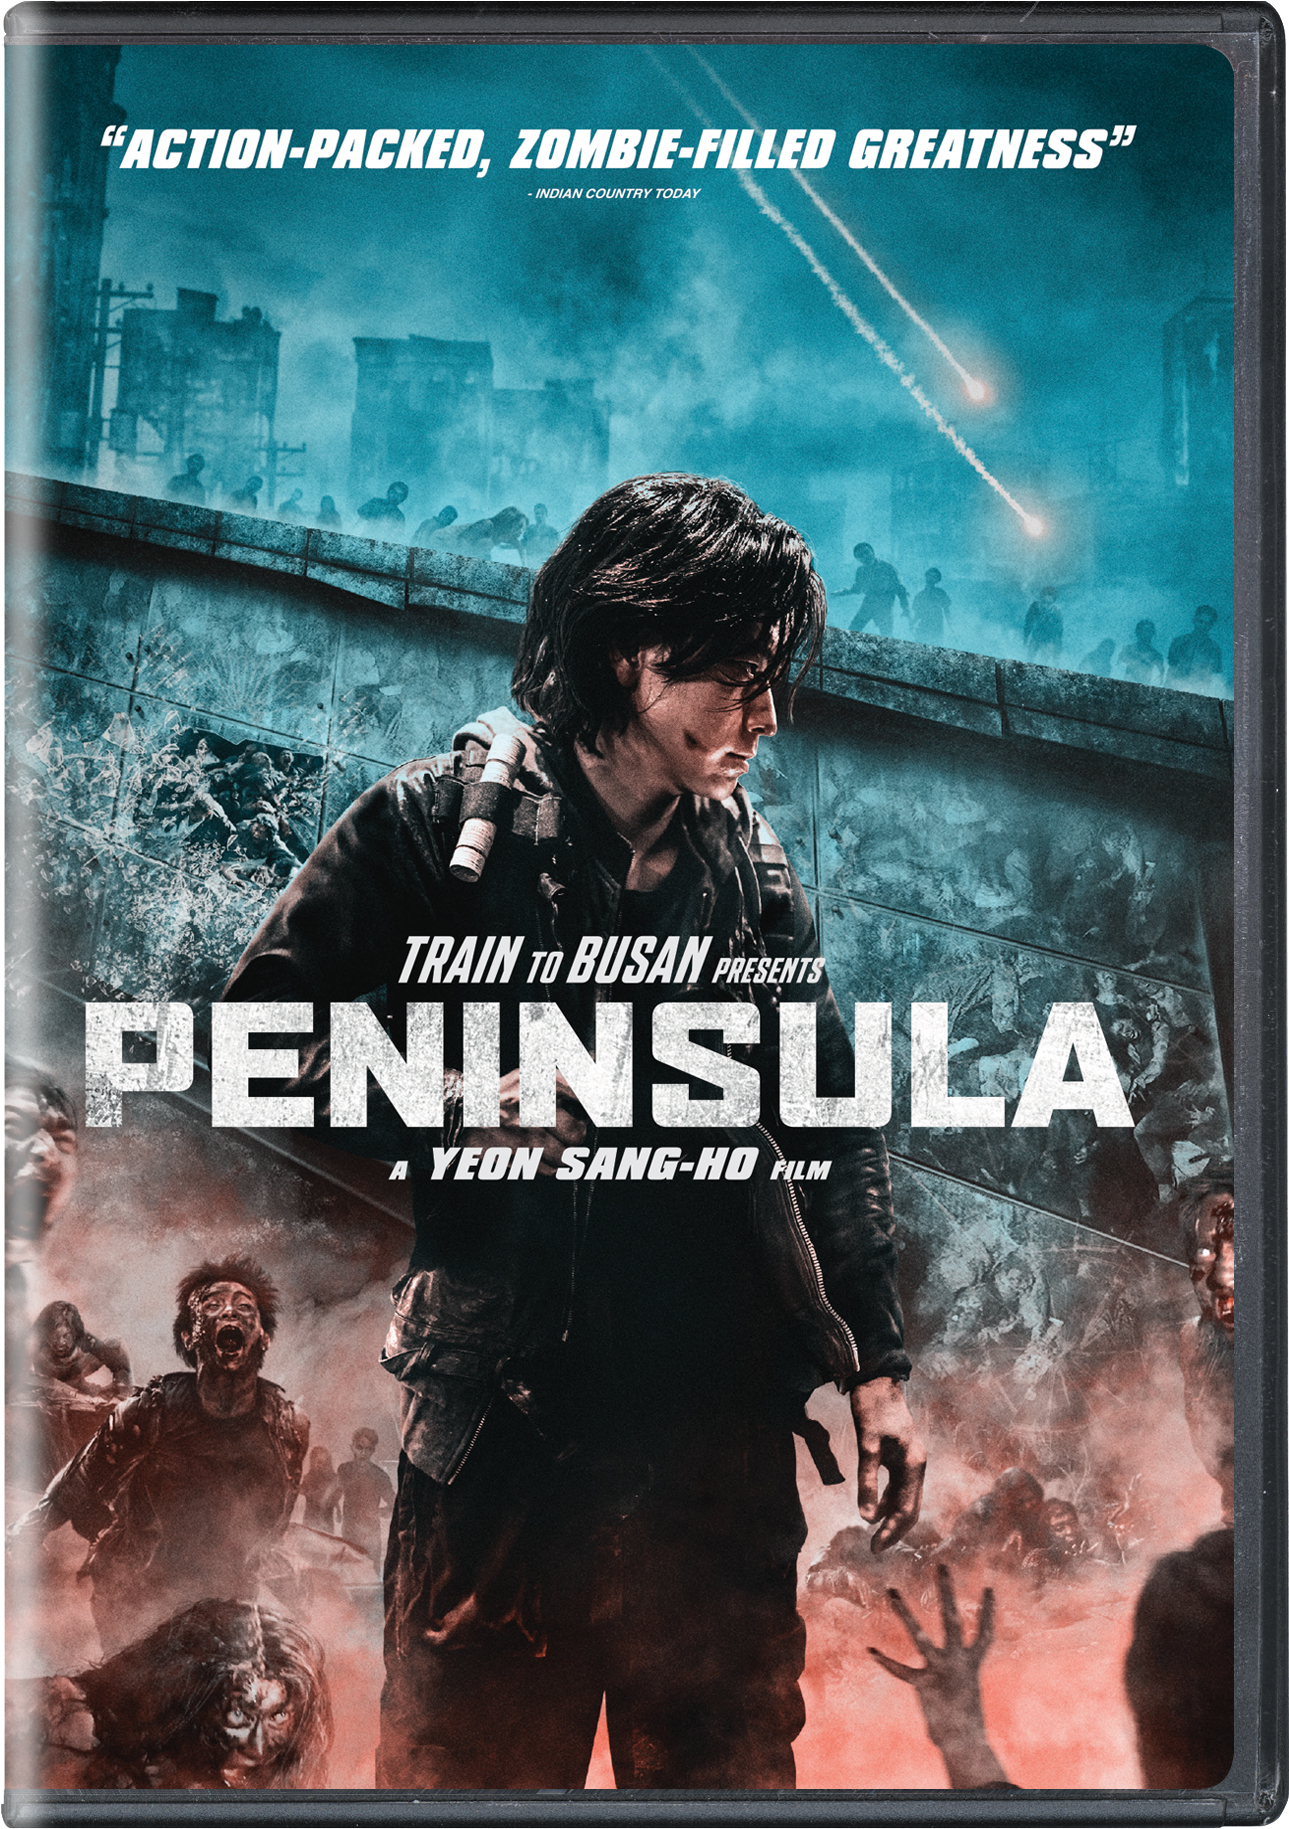 Train To Busan Presents - Peninsula - DVD [ 2020 ]  - Foreign Movies On DVD - Movies On GRUV